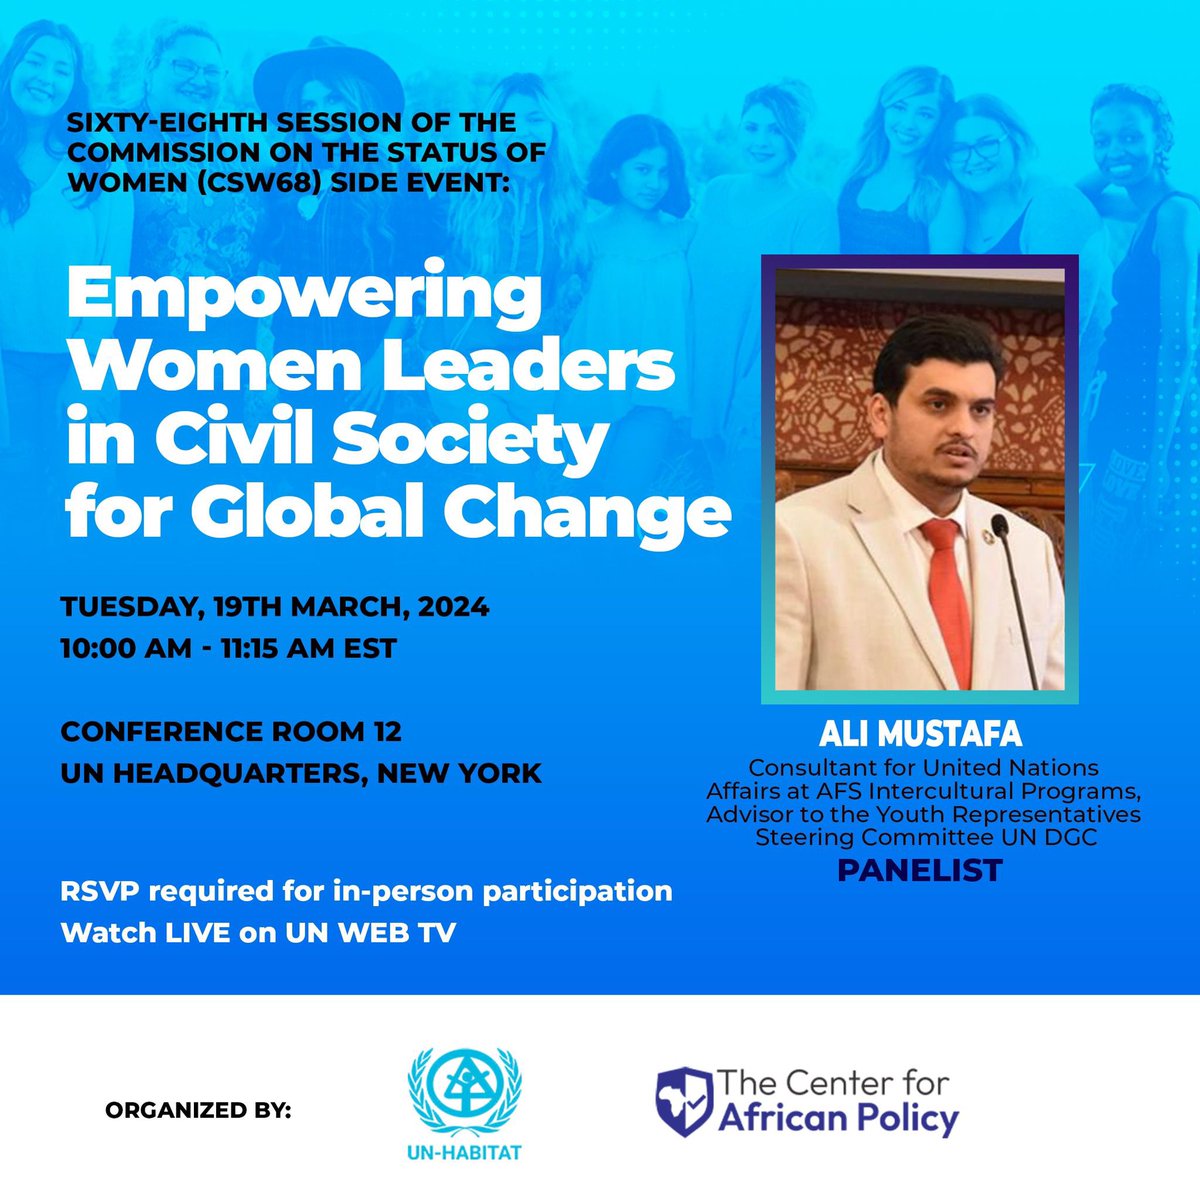 Join us today in a discussion on “Empowering Women Leaders in Civil Society for Global Change” a 68th UN CSW event. Live now at webtv.un.org/en/asset/k15/k… #CSW68 by @unhabitatyouth @UNHABITAT